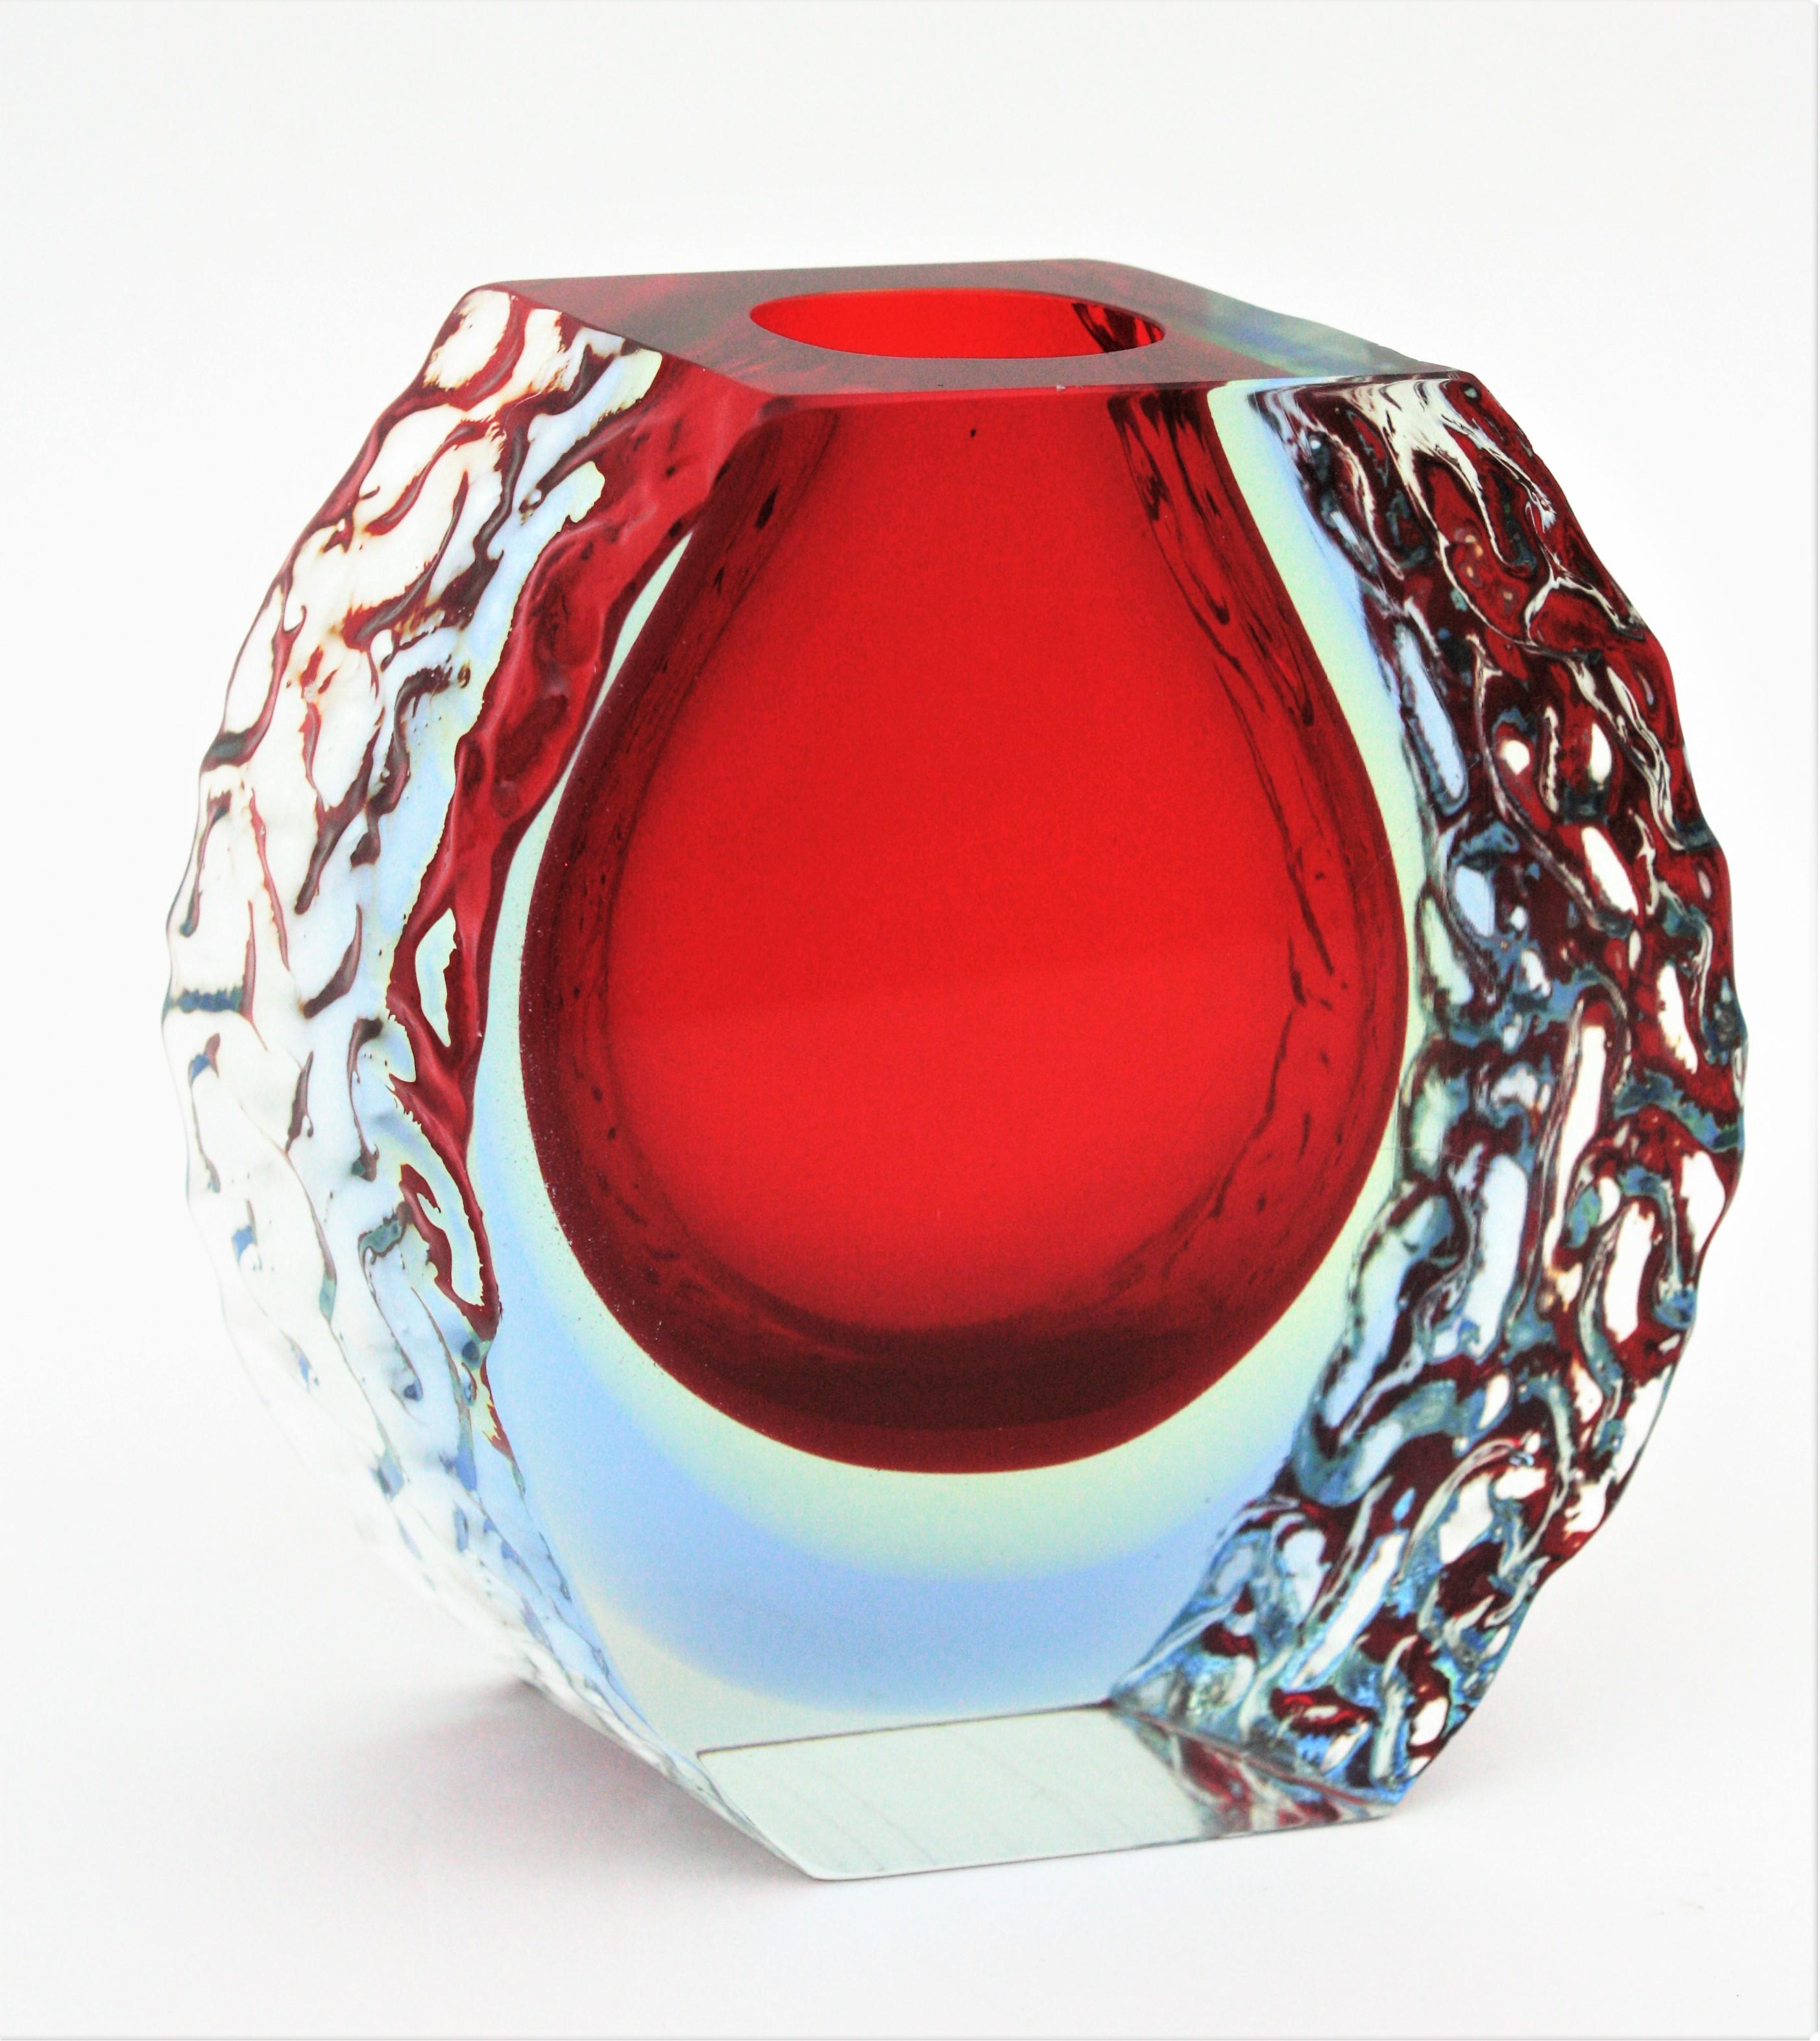 Art Glass Large Mandruzzato Murano Faceted Textured Red, Blue, Yellow Sommerso Glass Vase